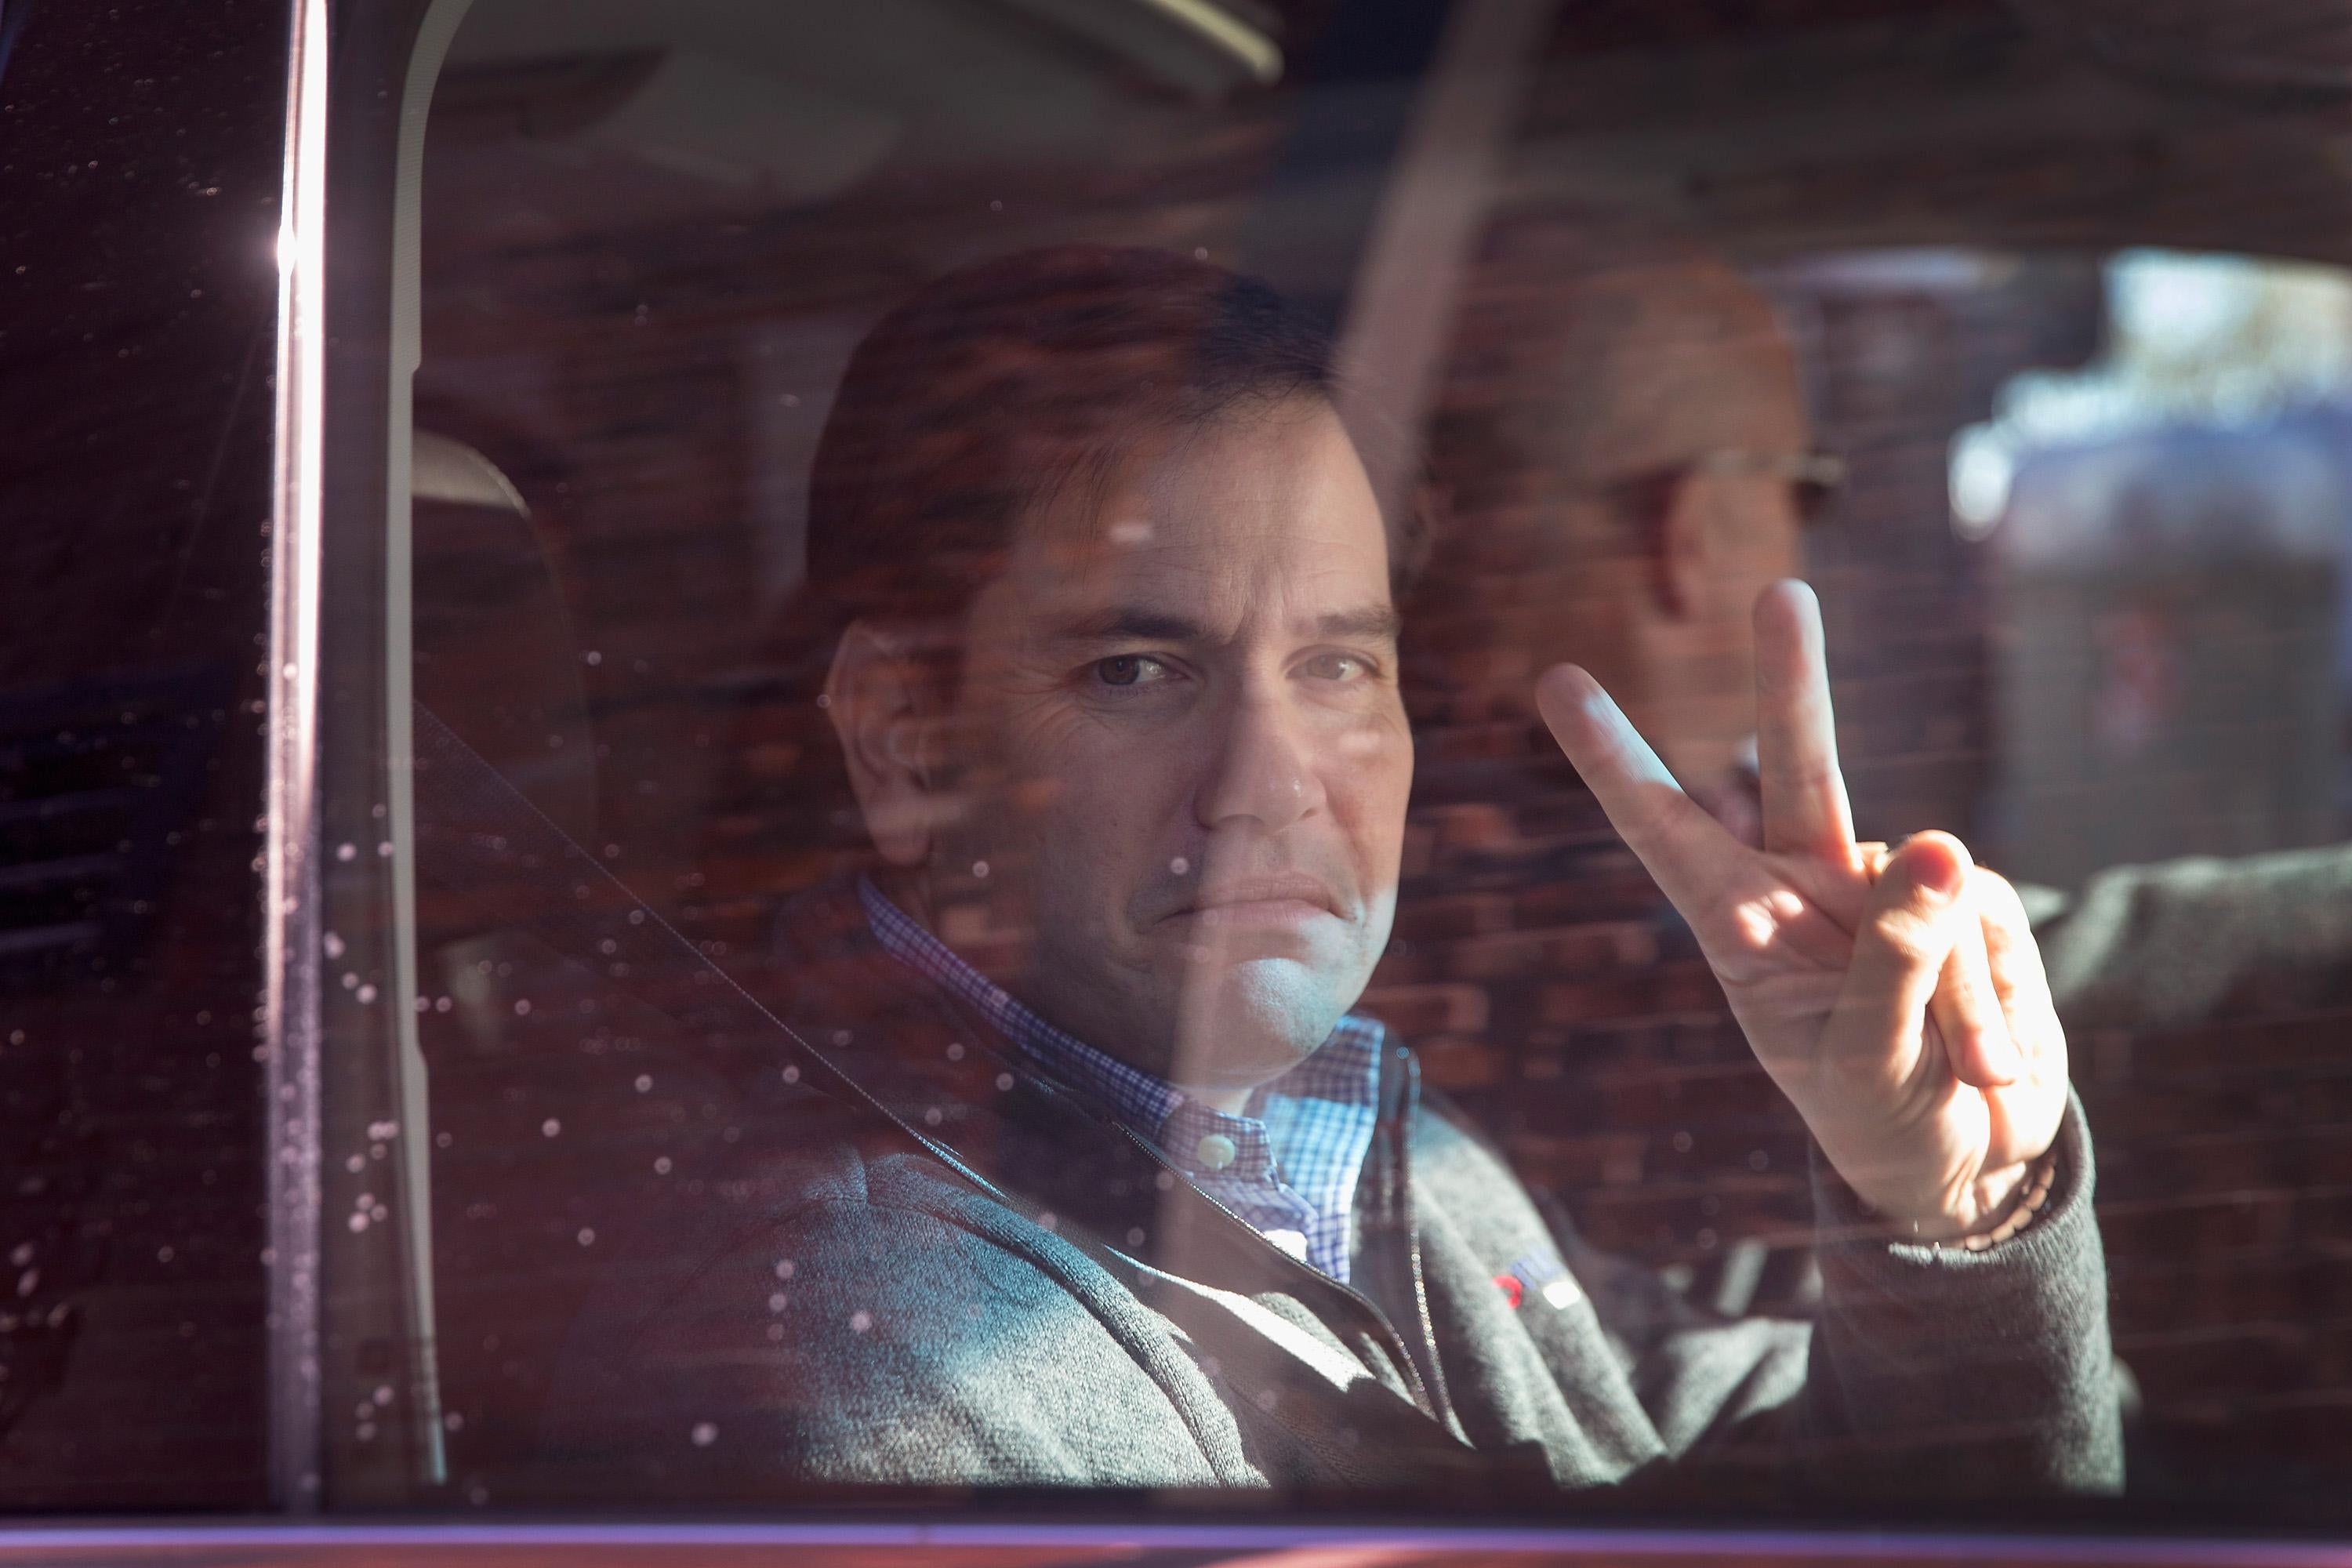 Rubio gives the peace symbol through the window.